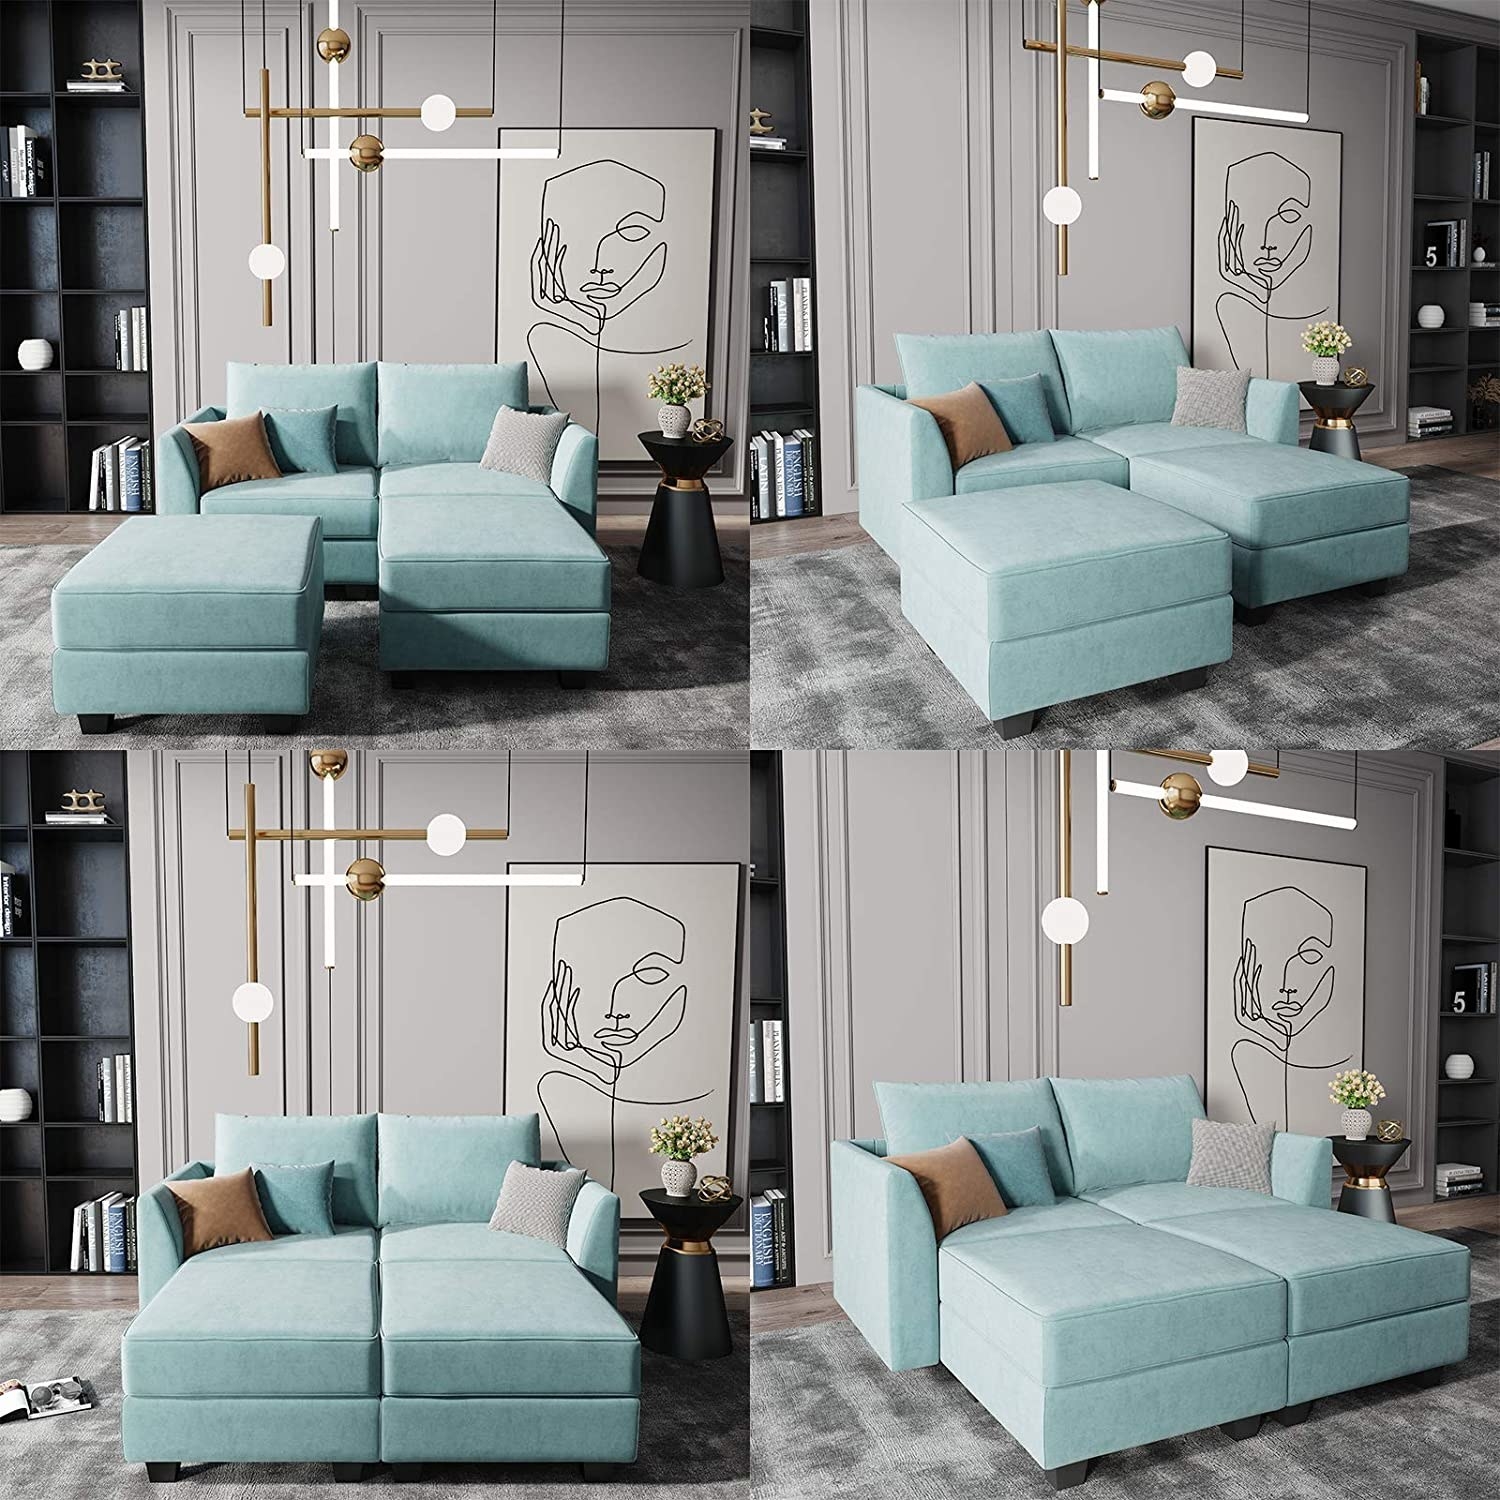 The sectional in the color Blue